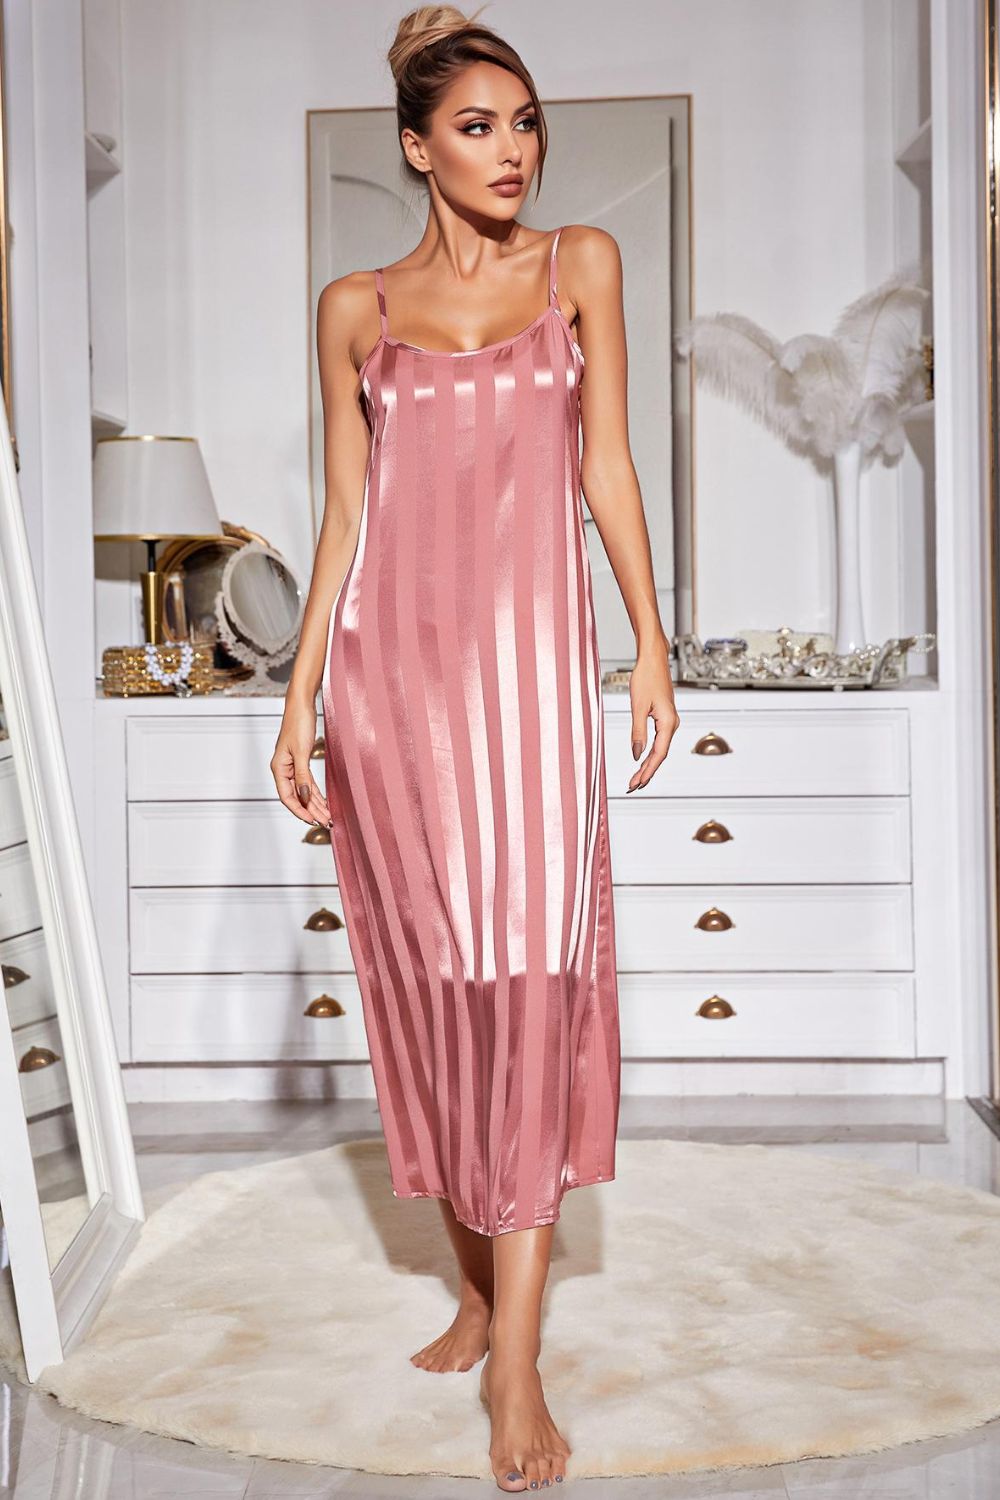 Villa Blvd Striped Open Front Robe + Cami Dress Set ☛ Multiple Colors Available ☚